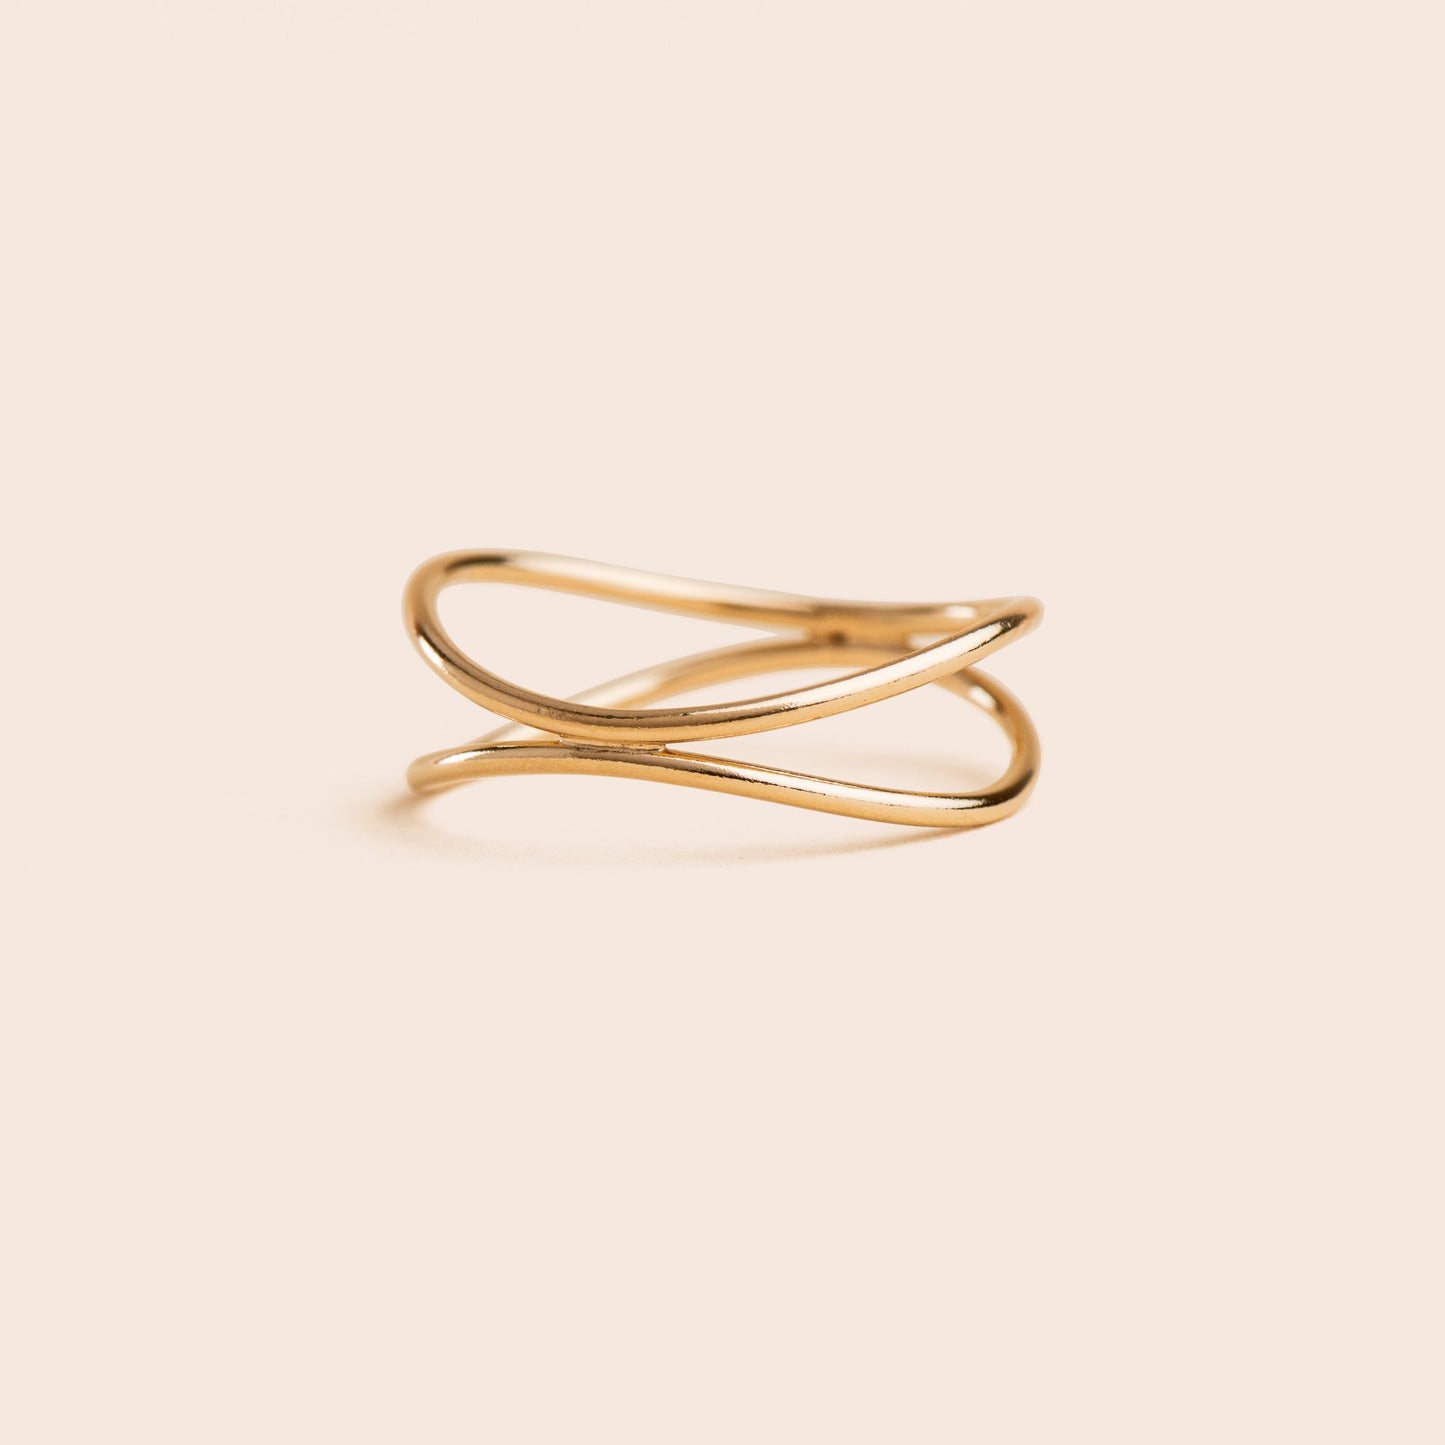 Criss Cross - Gold Filled Stacking Ring - Gemlet